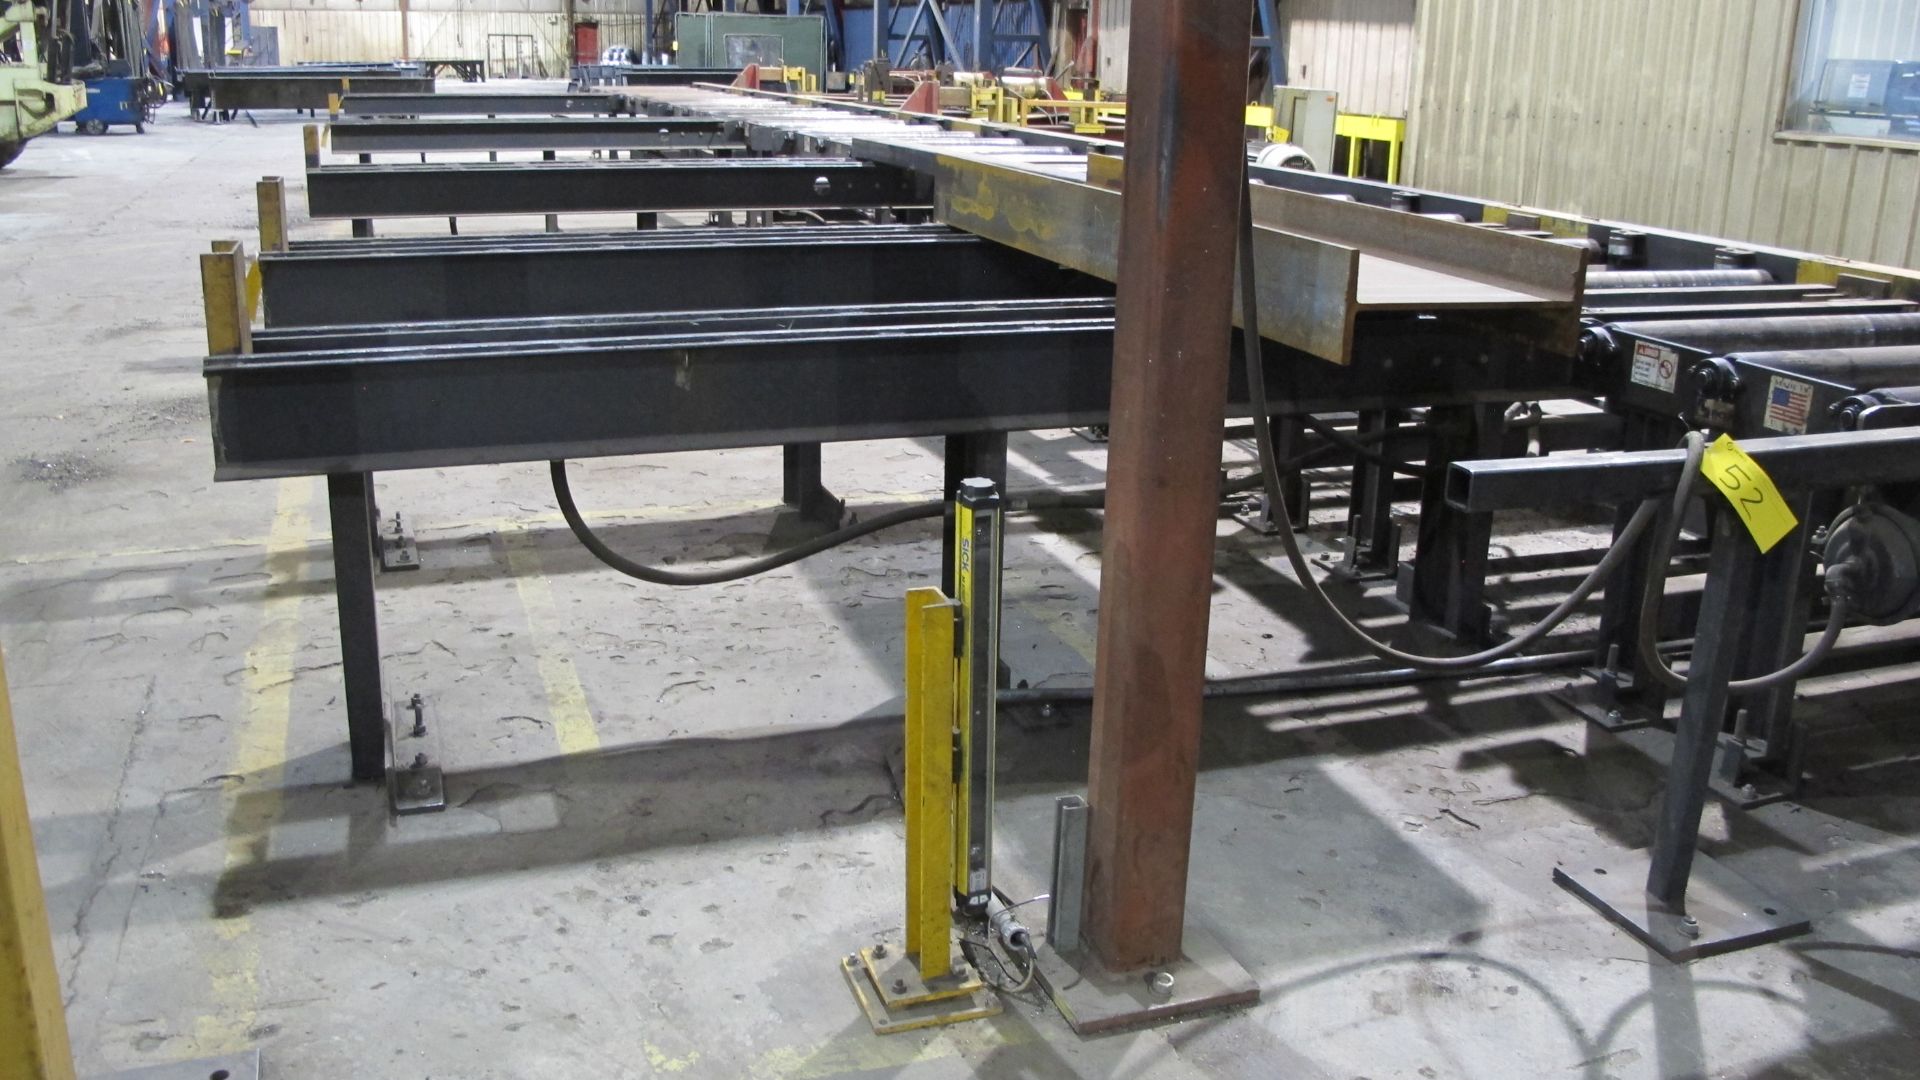 2009 FICEP BEAM DRILL LINE CONSISTING OF: FICEP 1001 DFB BEAM DRILL, S/N 32133, TANDEM CNC/PLC - Image 25 of 29